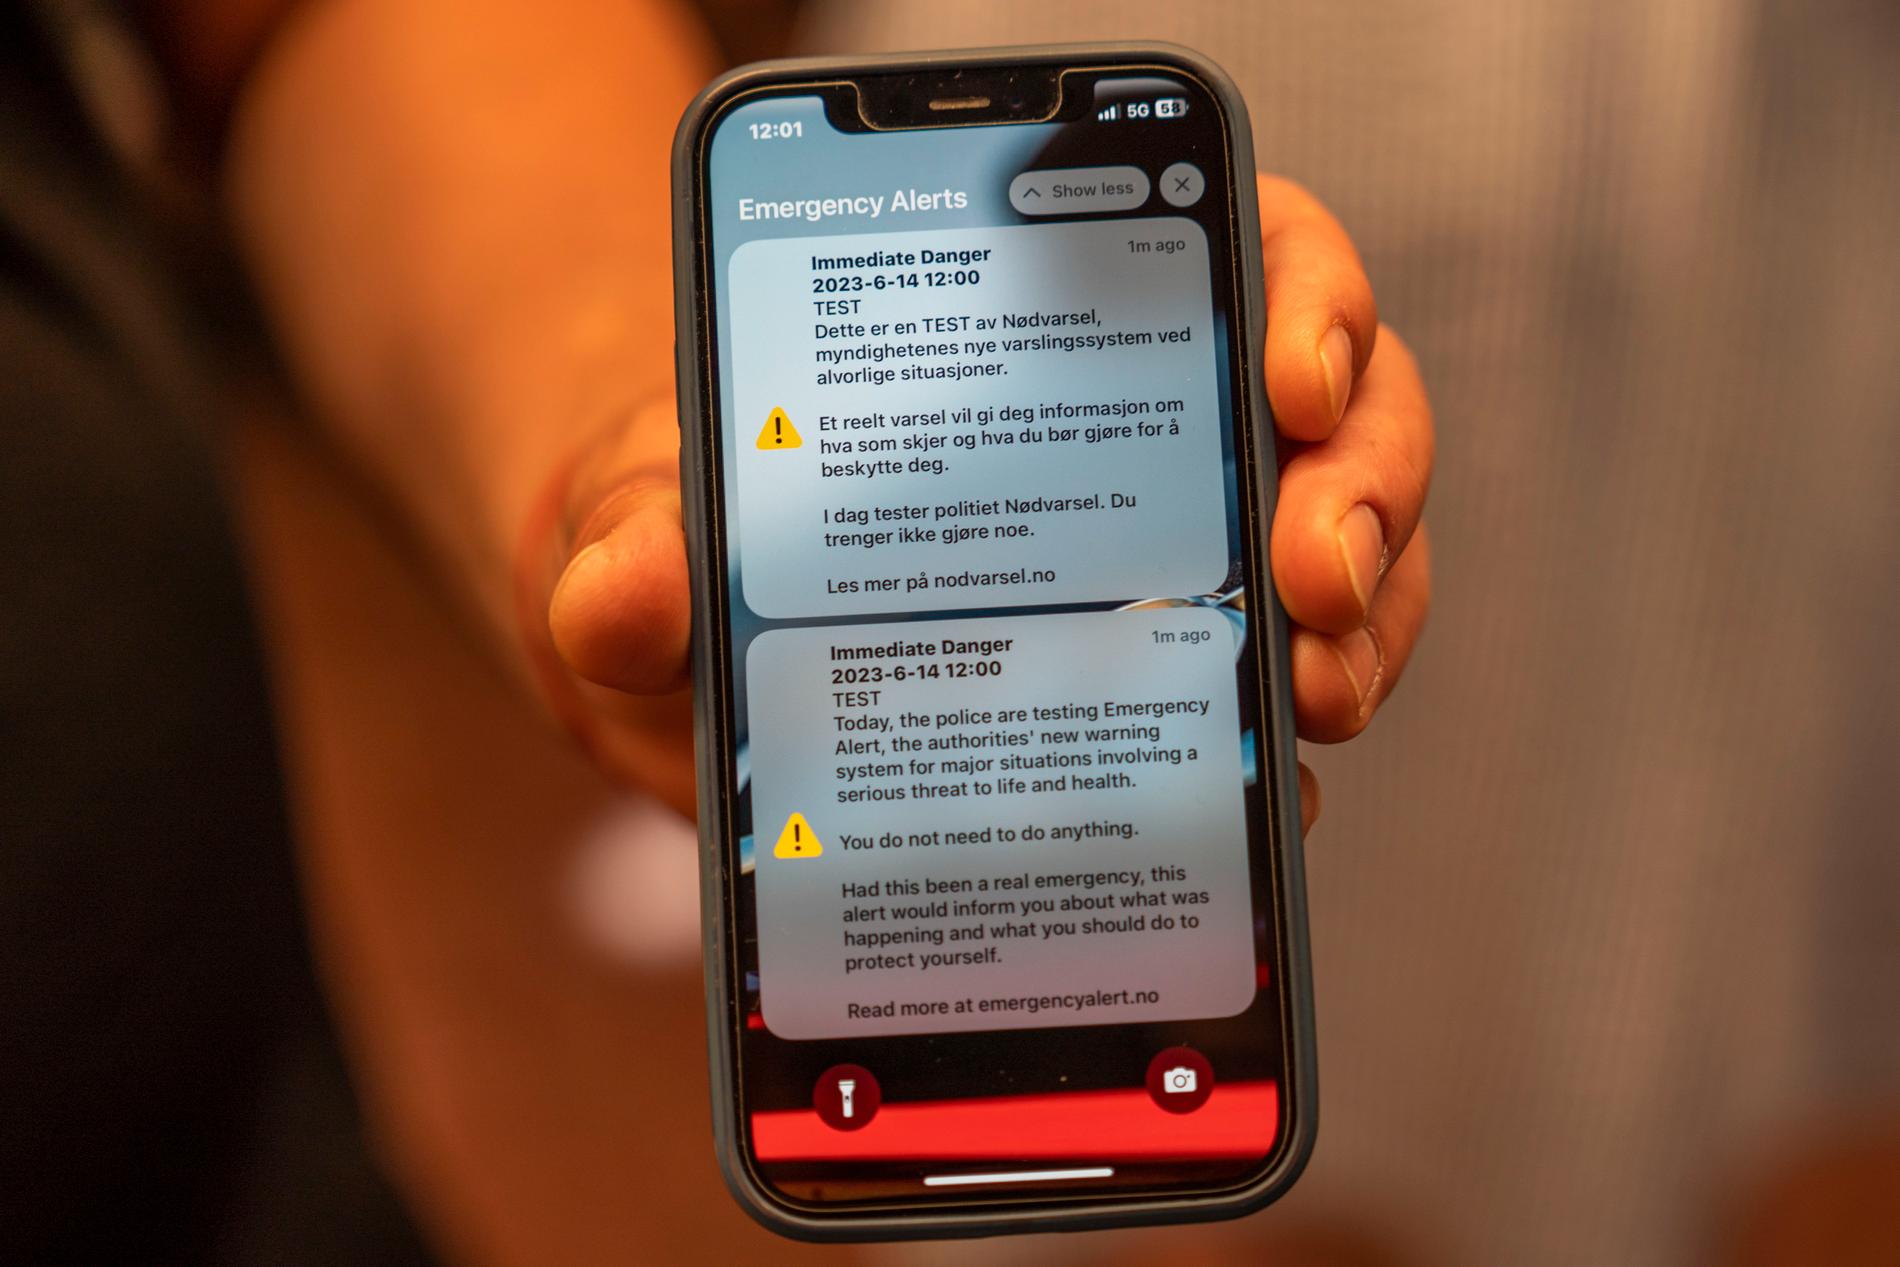 Testing emergency alerts on mobile on January 10